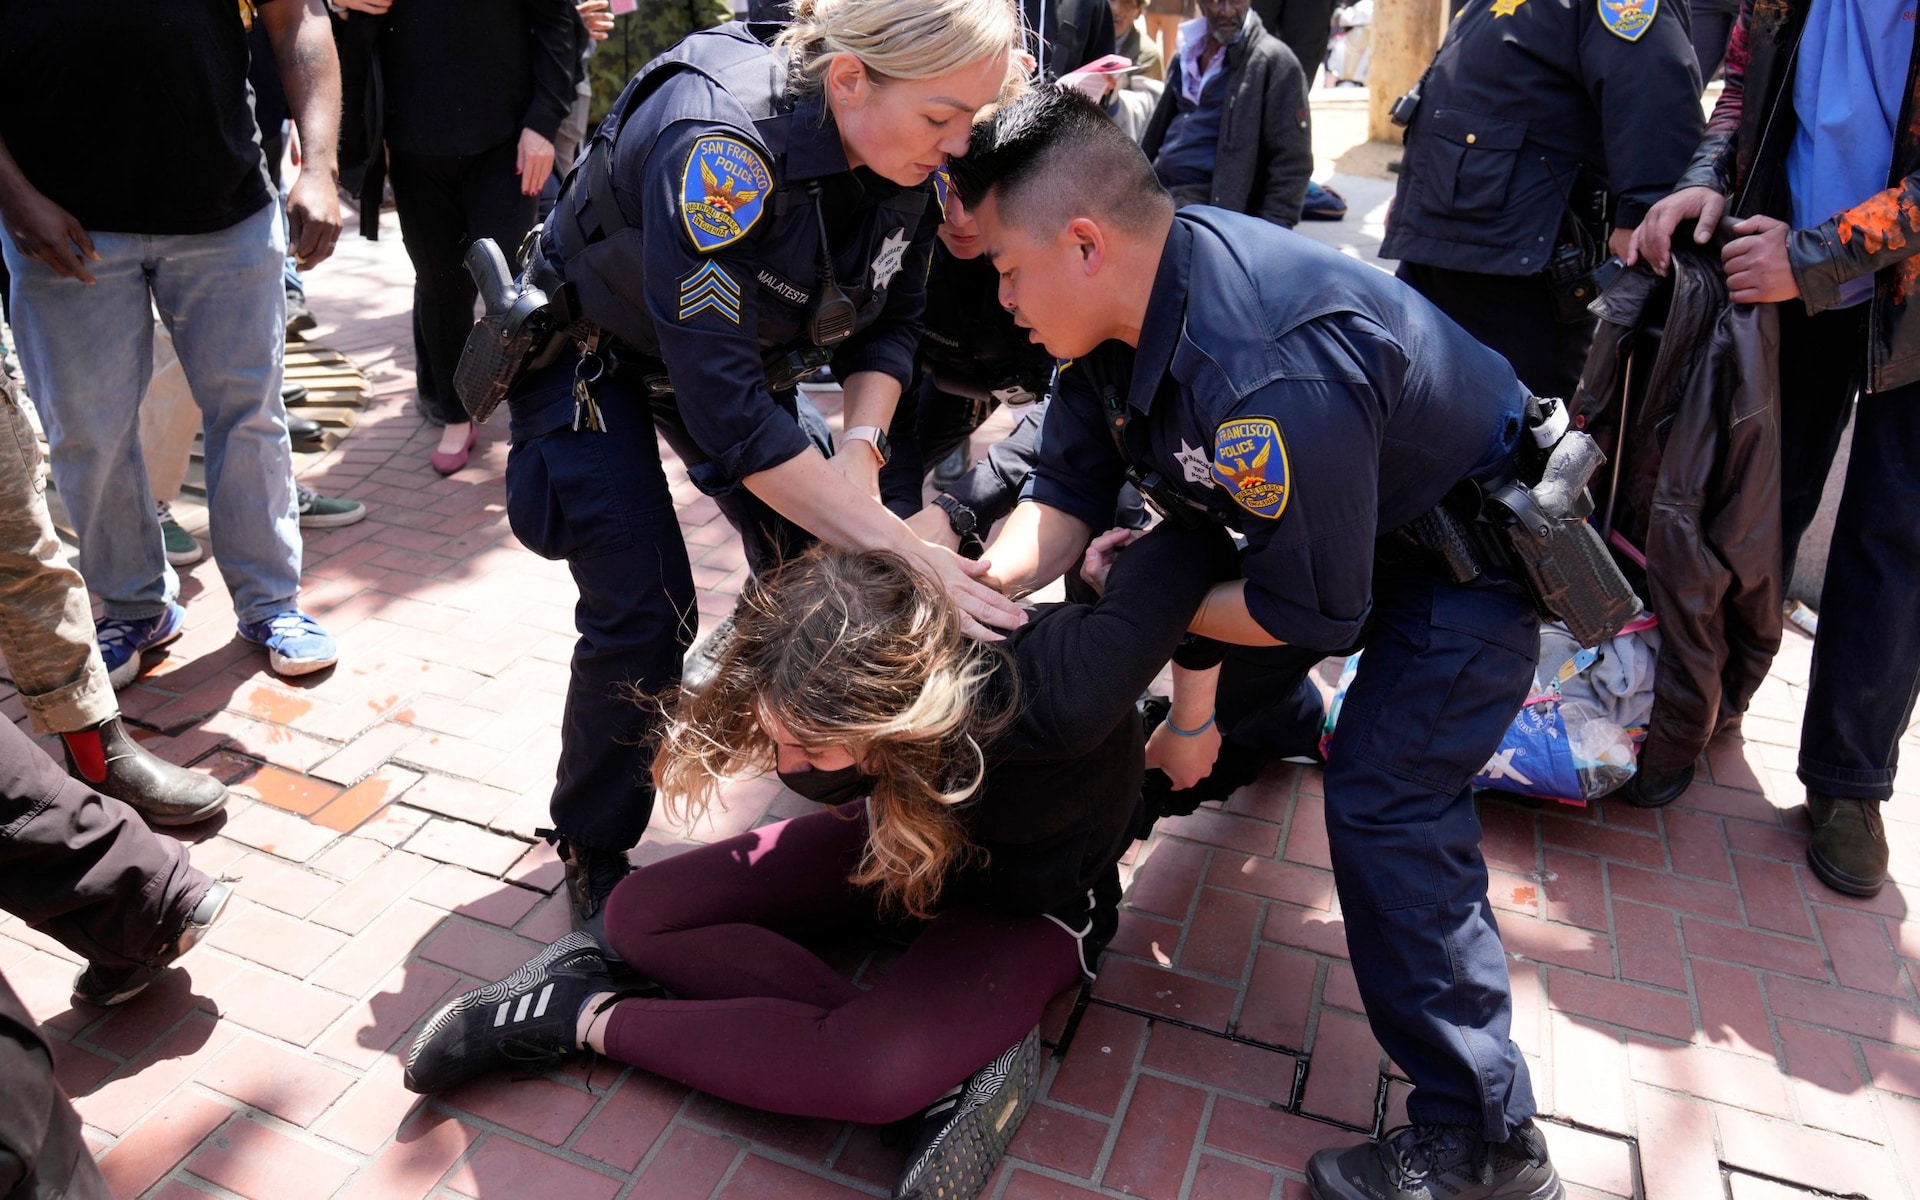 san francisco mayor forced to abandon public safety meeting after protester throws brick